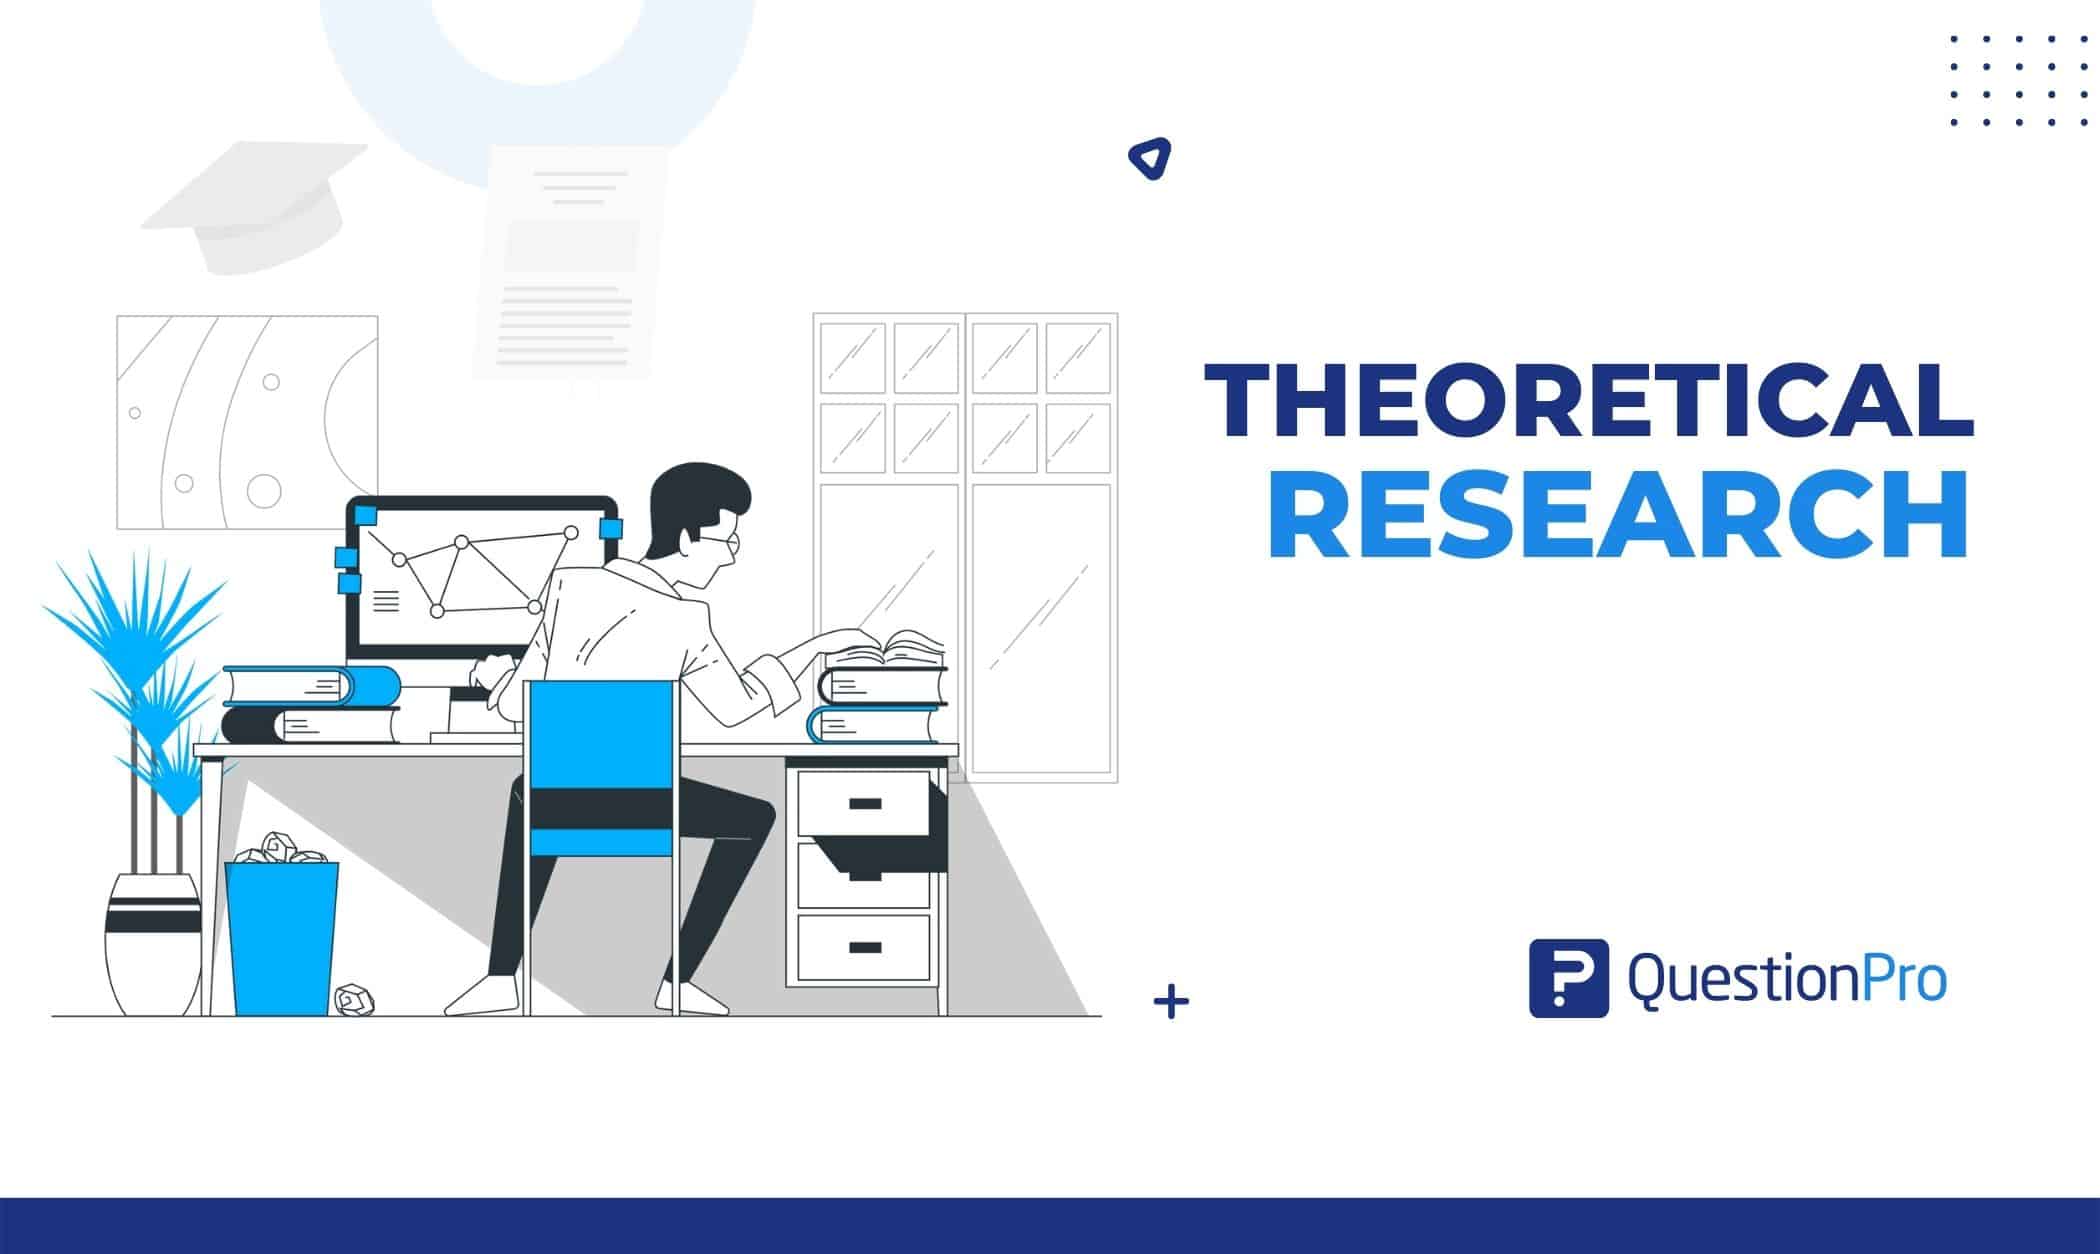 Theoretical research allows to explore and analyze a research topic by employing abstract theoretical structures and philosophical concepts.